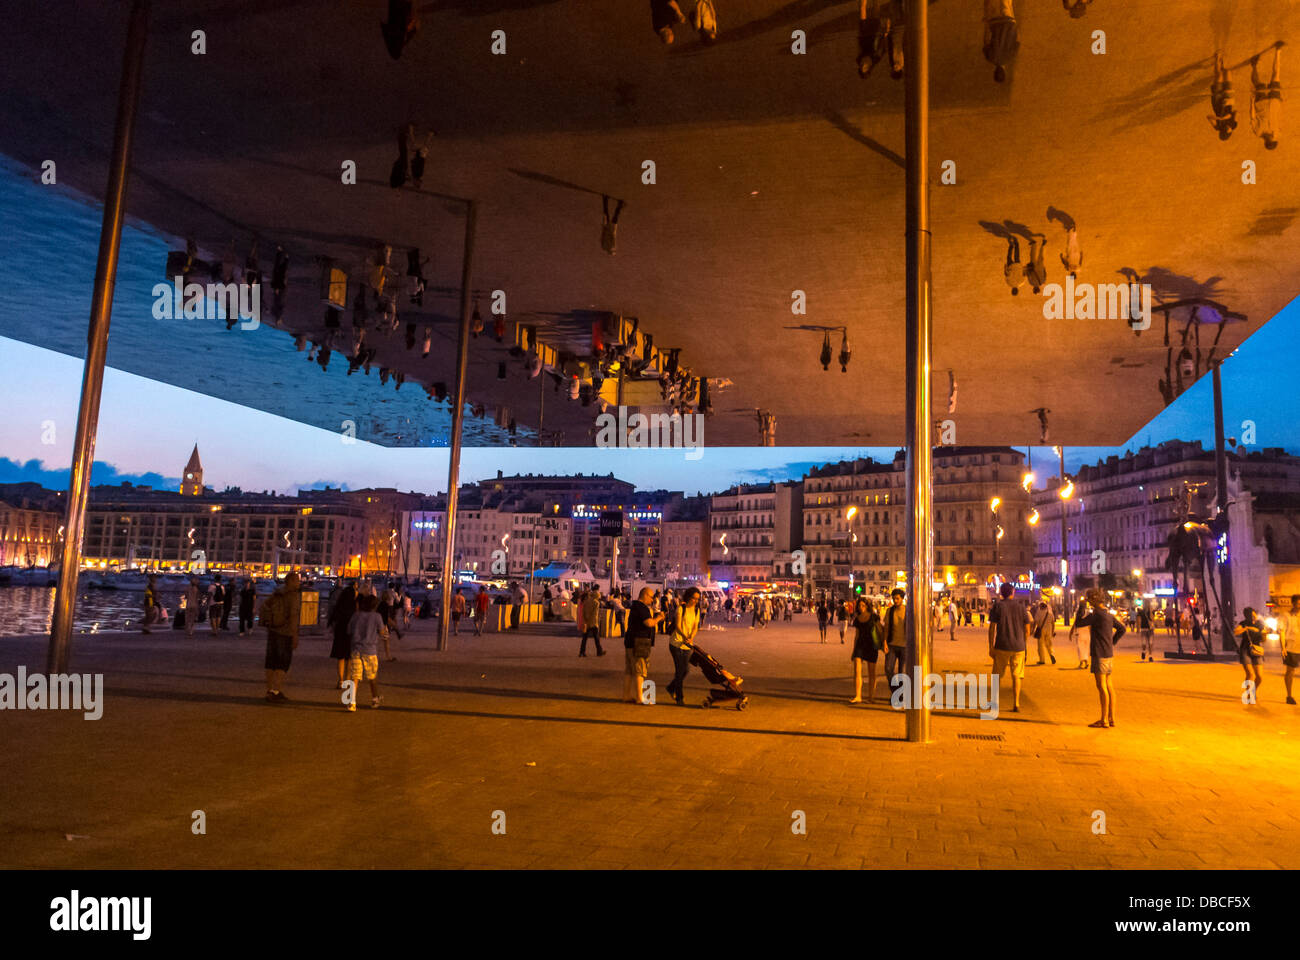 Marseille France, Tourists Visiting Vieux Port area, Street Scenes, With Huge Mirror Installation at Dusk Stock Photo